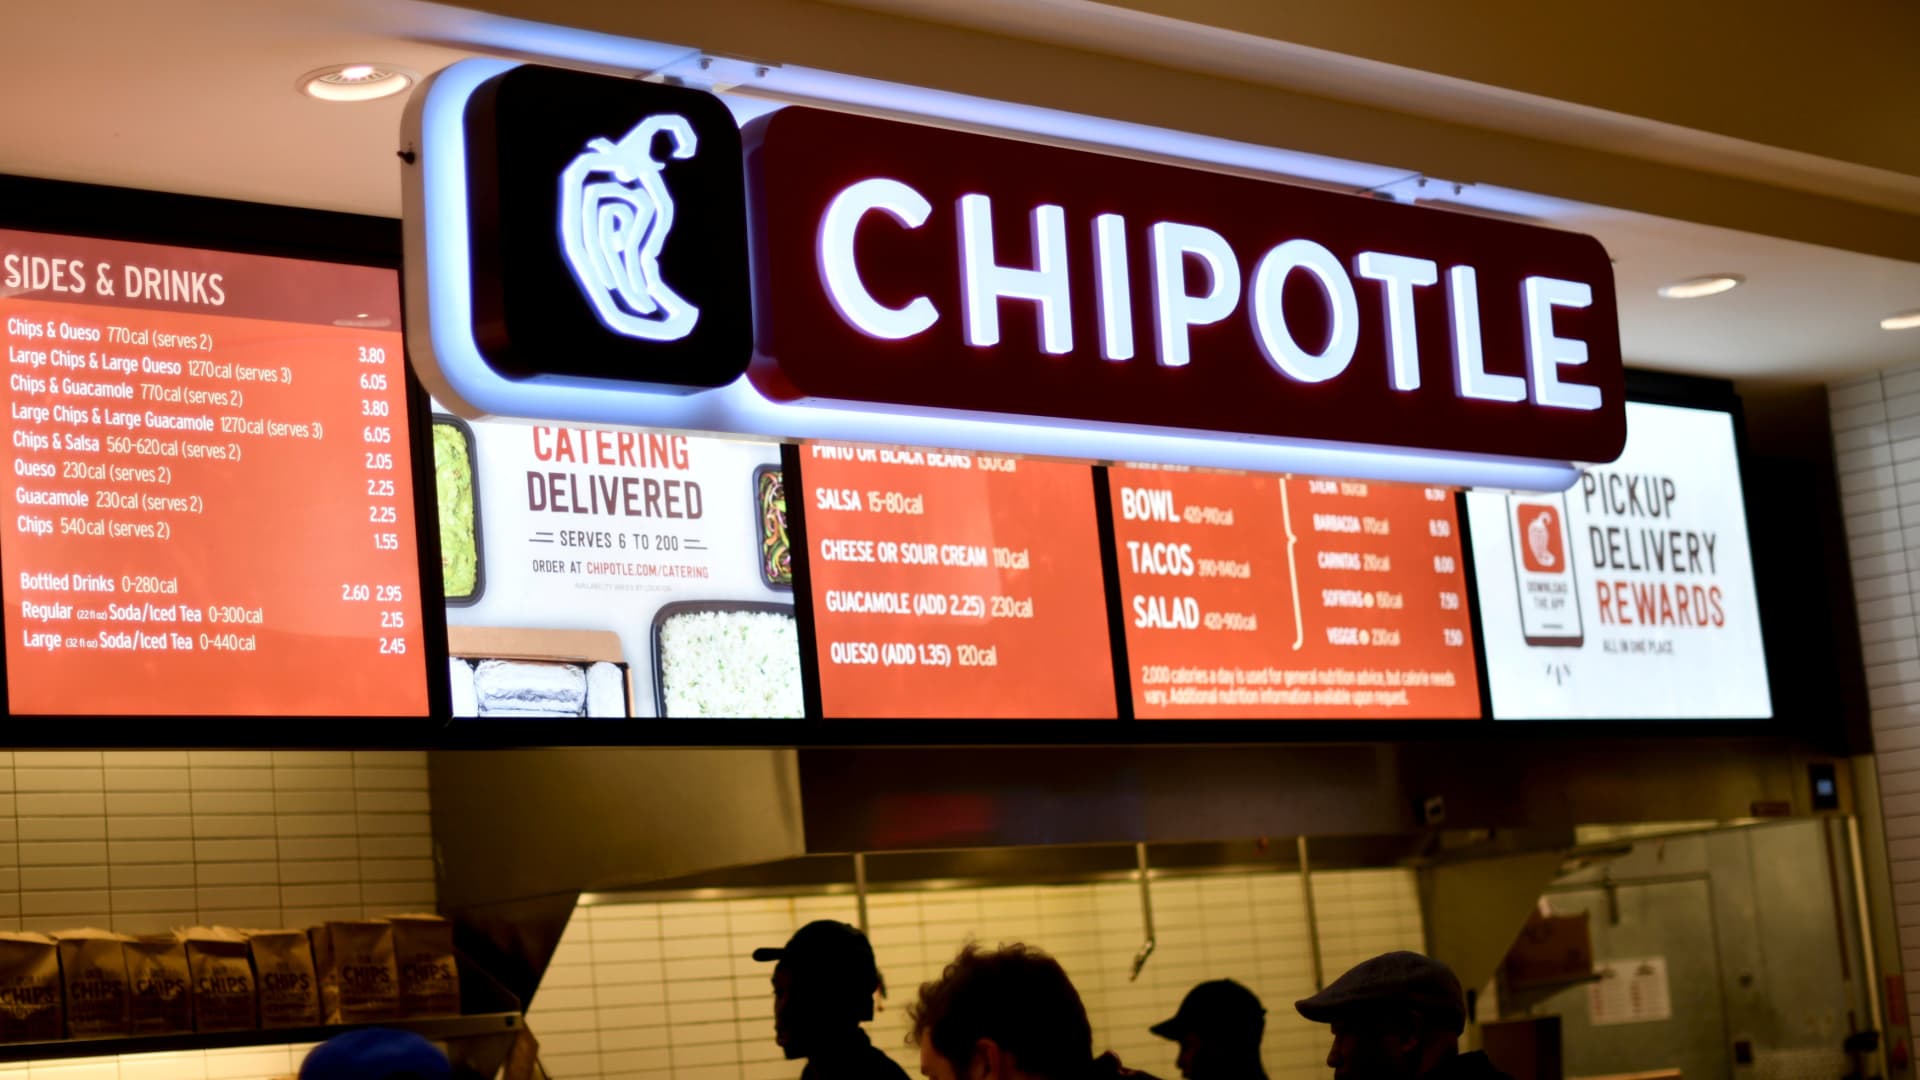 Customers order from a Chipotle restaurant at the King of Prussia Mall in King of Prussia, Pennsylvania.